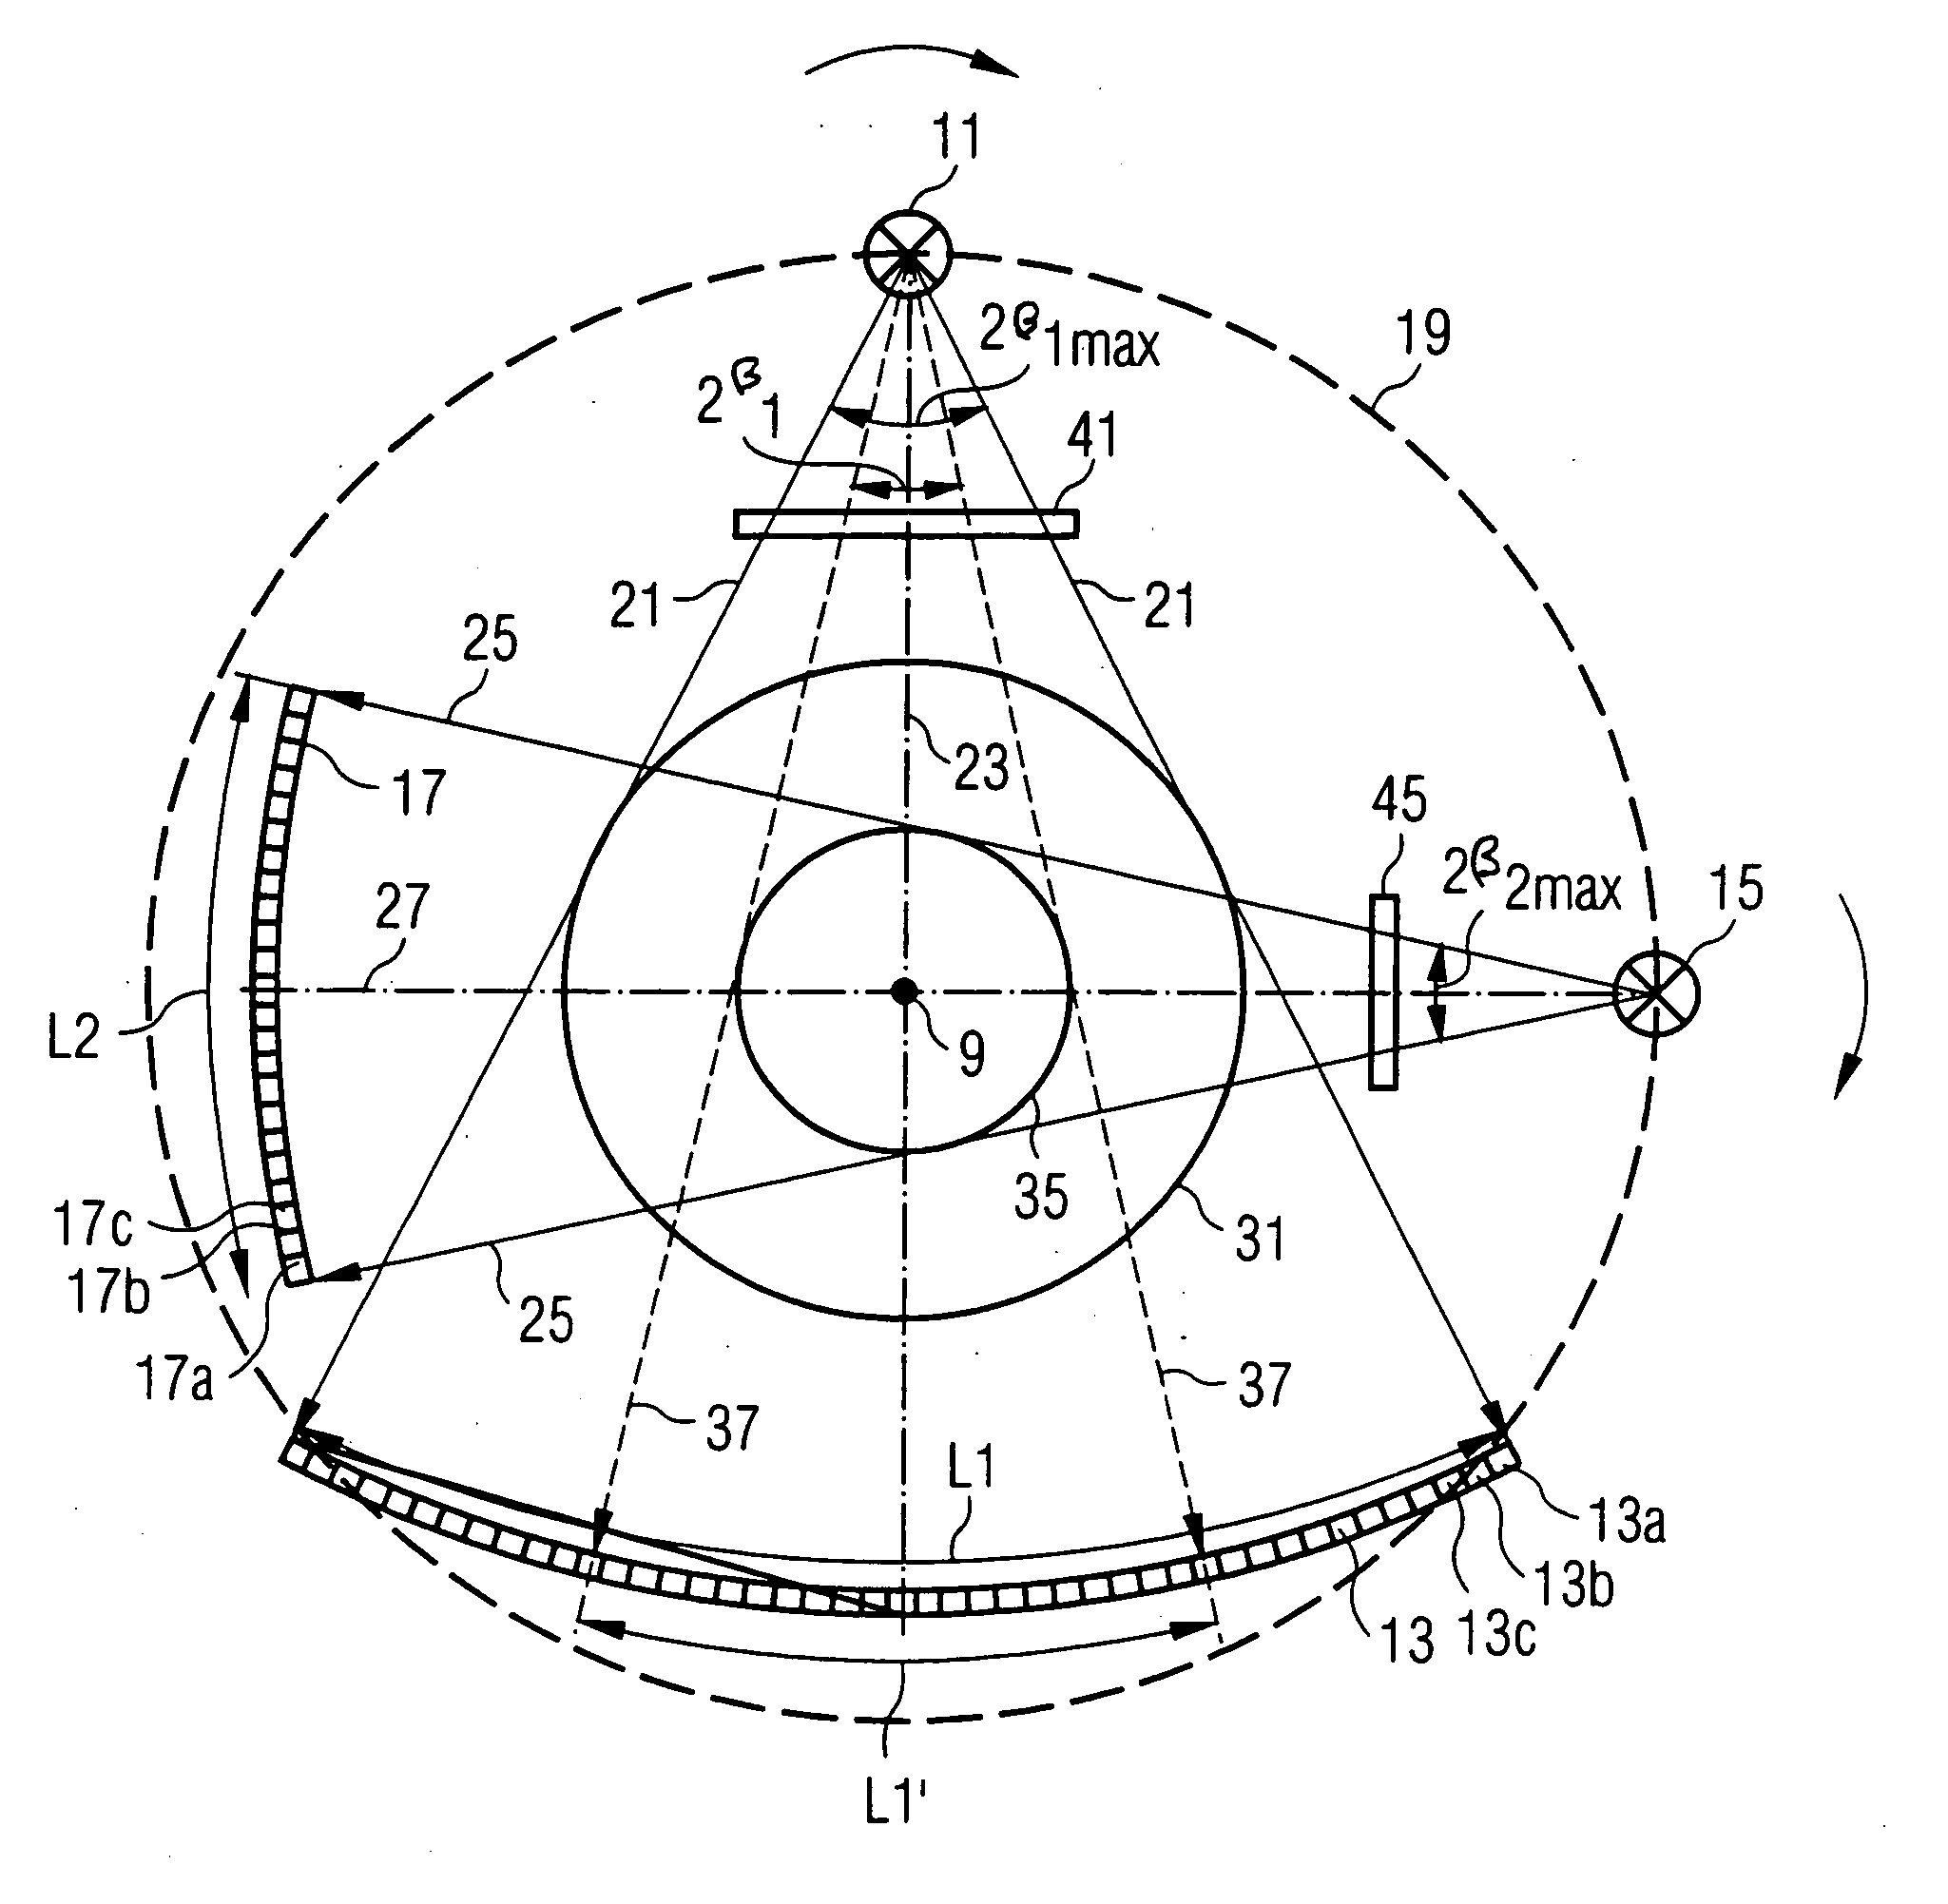 Imaging tomography apparatus with at least two radiator-detector combinations